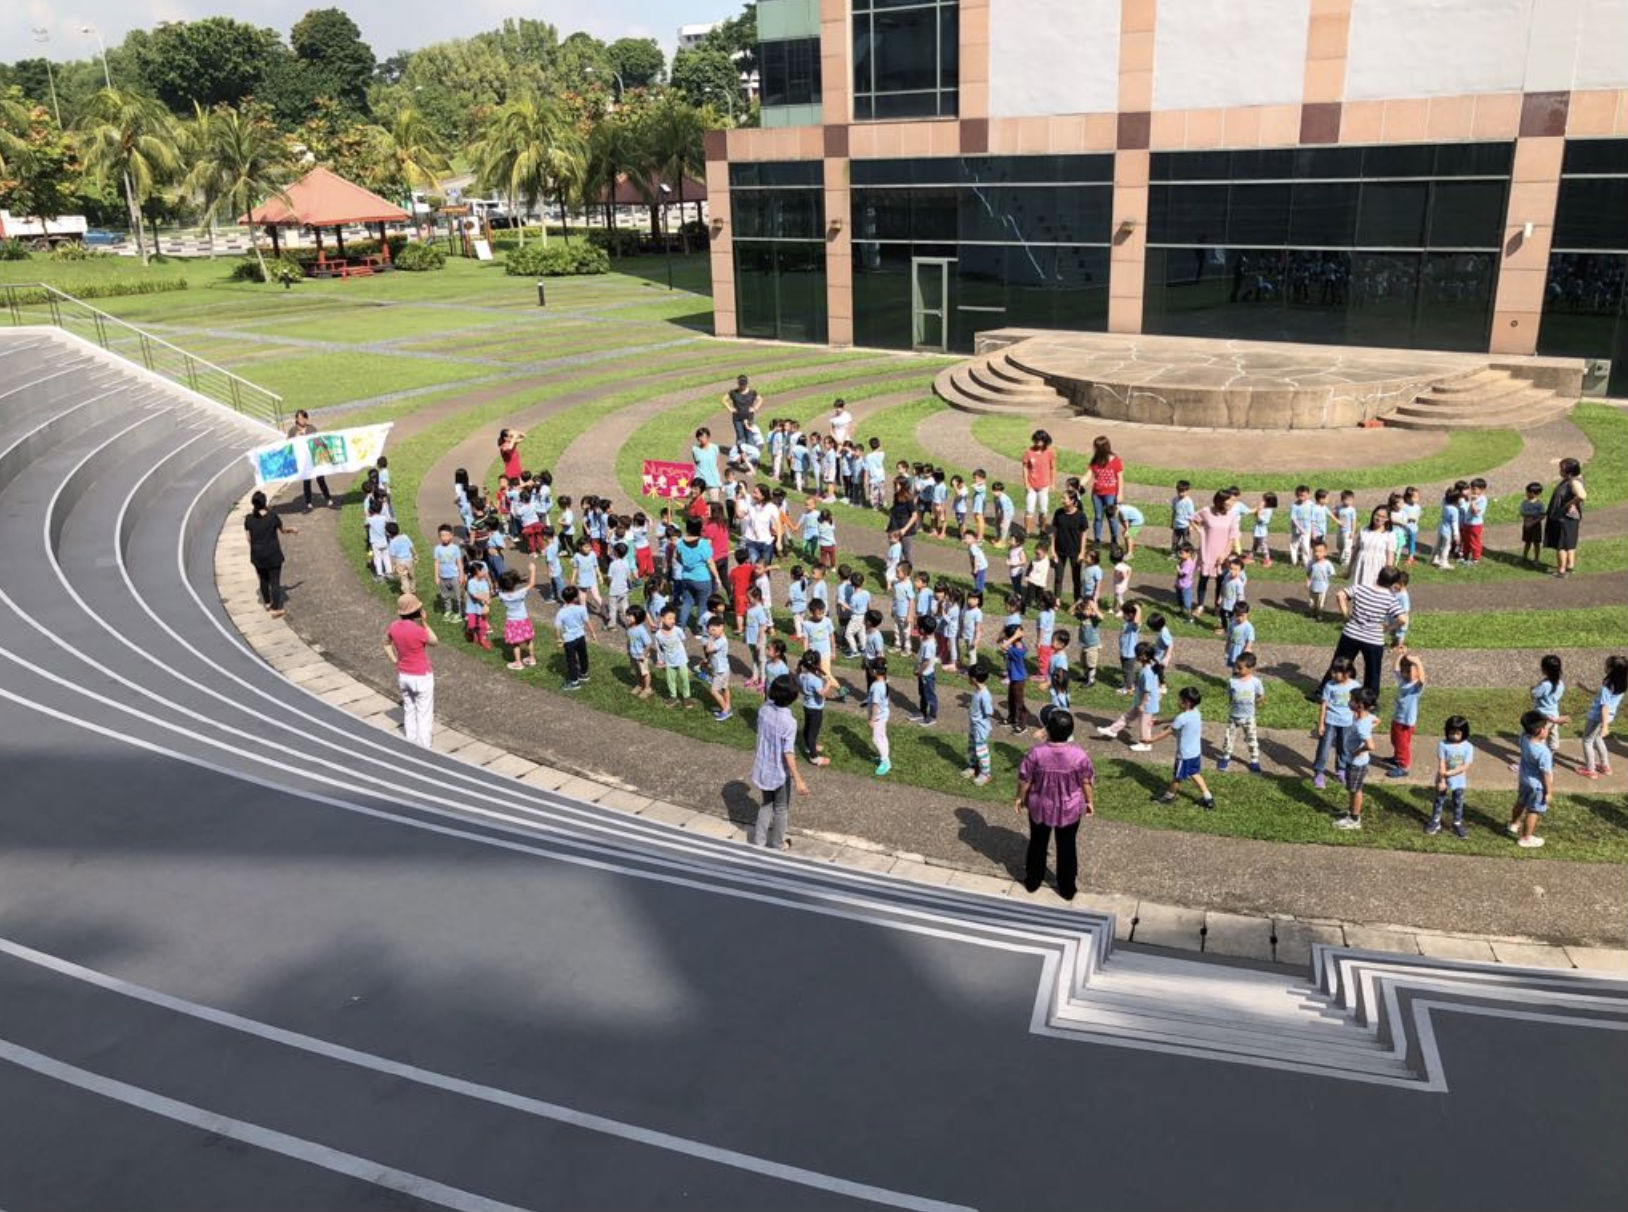 Preschoolers from Creative O Preschoolers’ Bay at 31 International Business Park line up outside in an undated file photo. Photo: Creative O Preschoolers’ Bay/Facebook